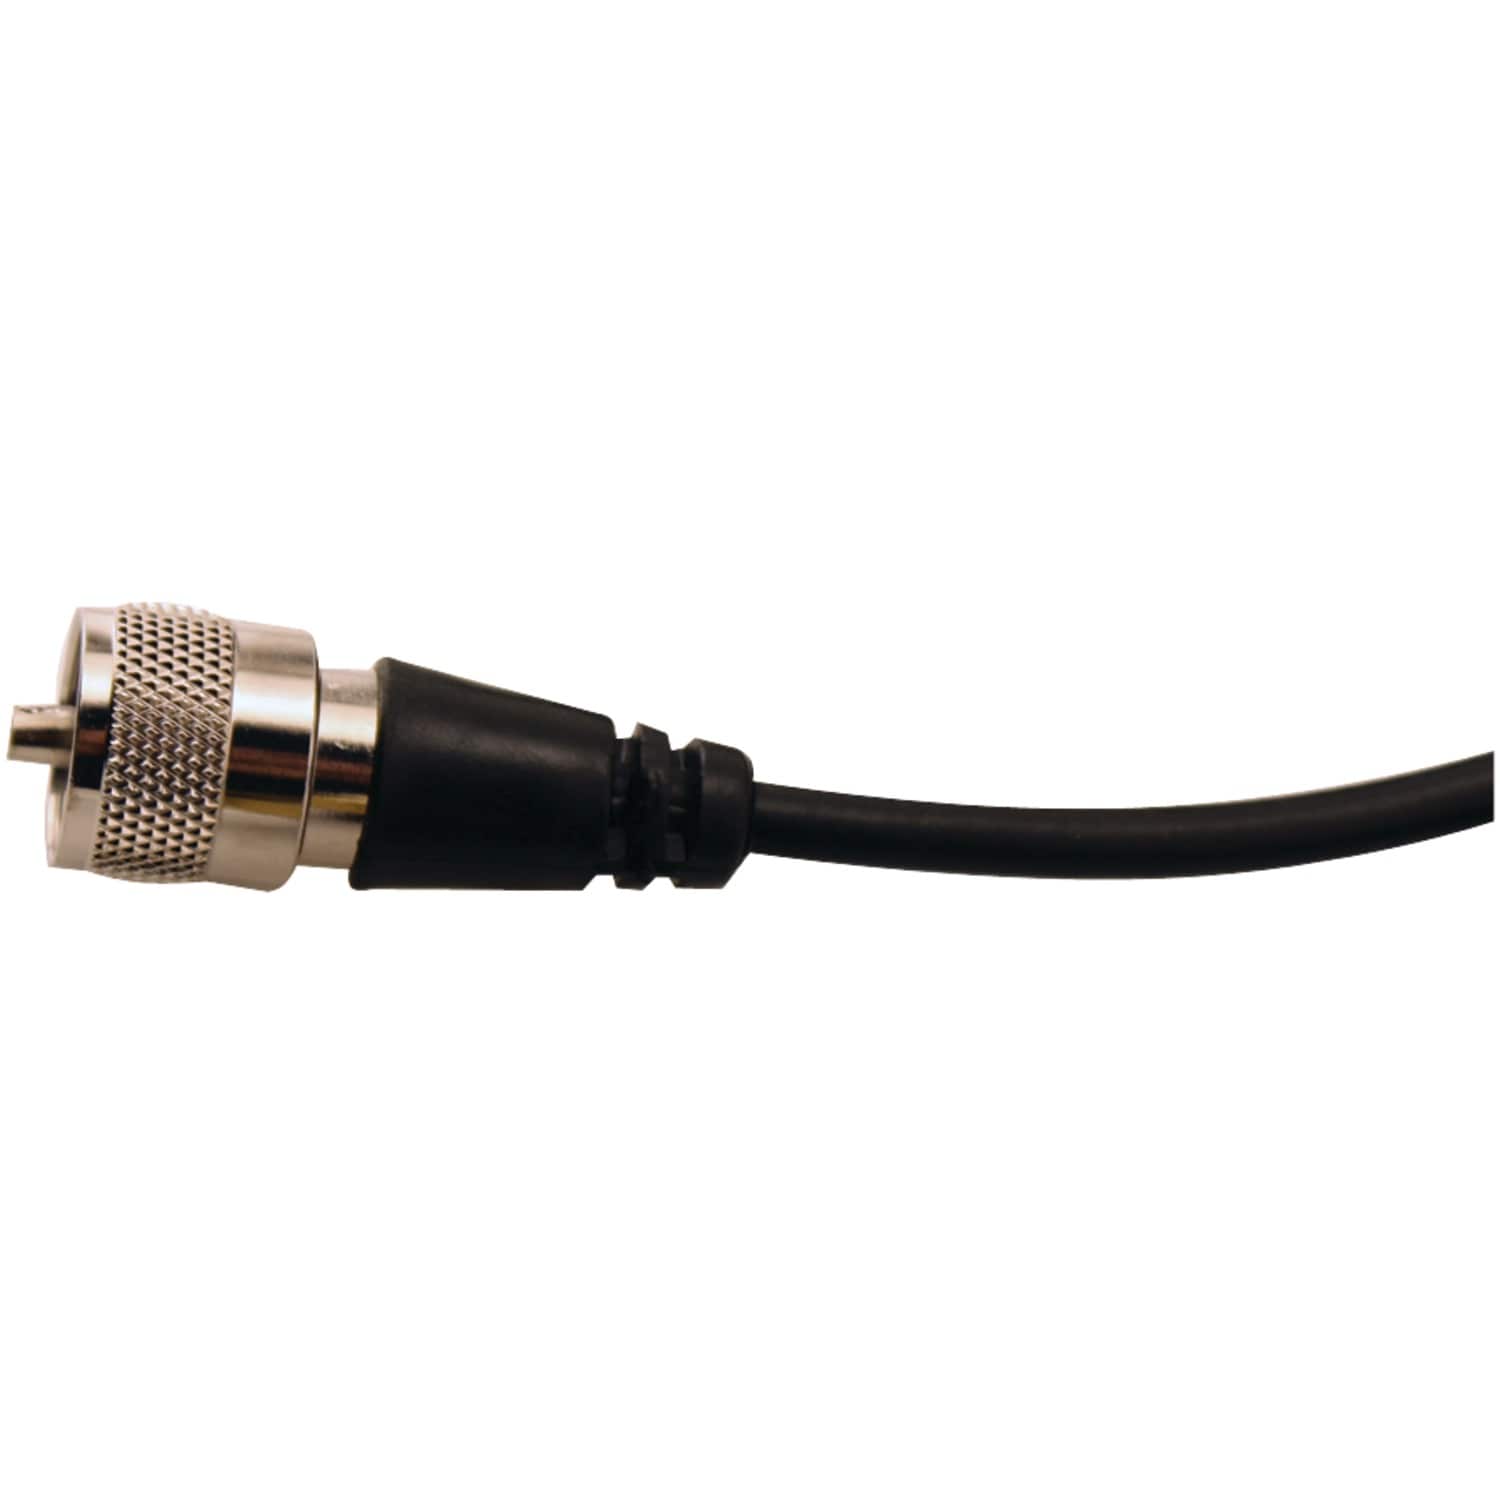 25' Carol C5779-30-10 RG-58A/U, Thinnet Ethernet Coaxial Cable, 25 Foot  Length